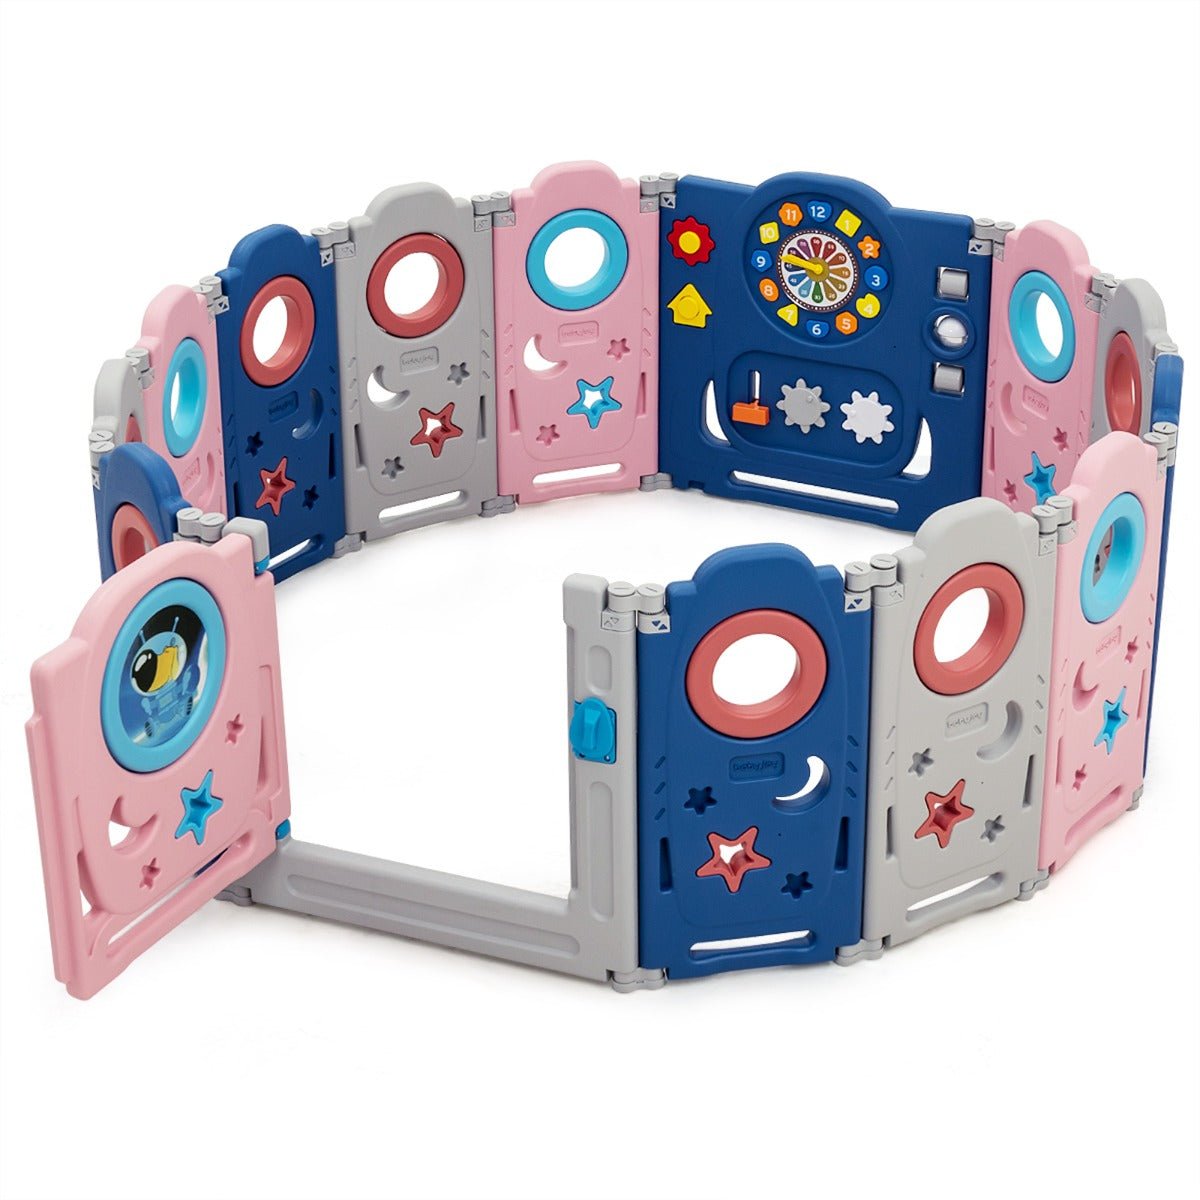 Baby Play Area with Door Lock and Adjustable Features